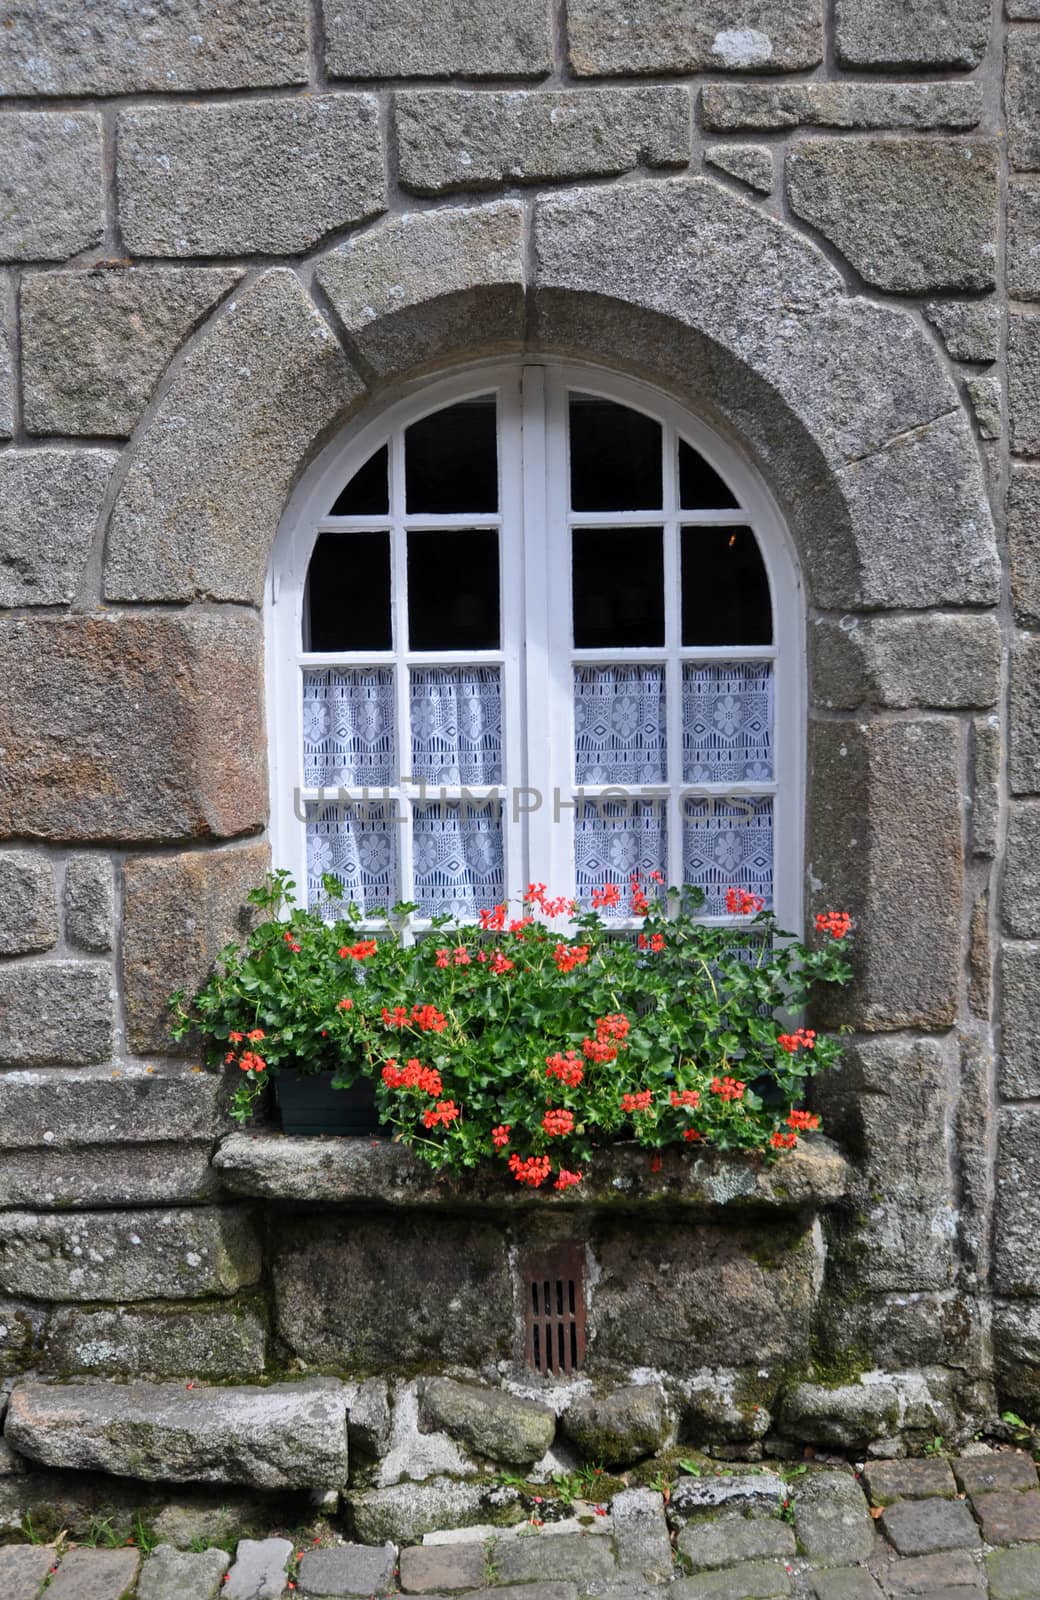 Floral window display in the village of Locronan, in Brittany, rural France